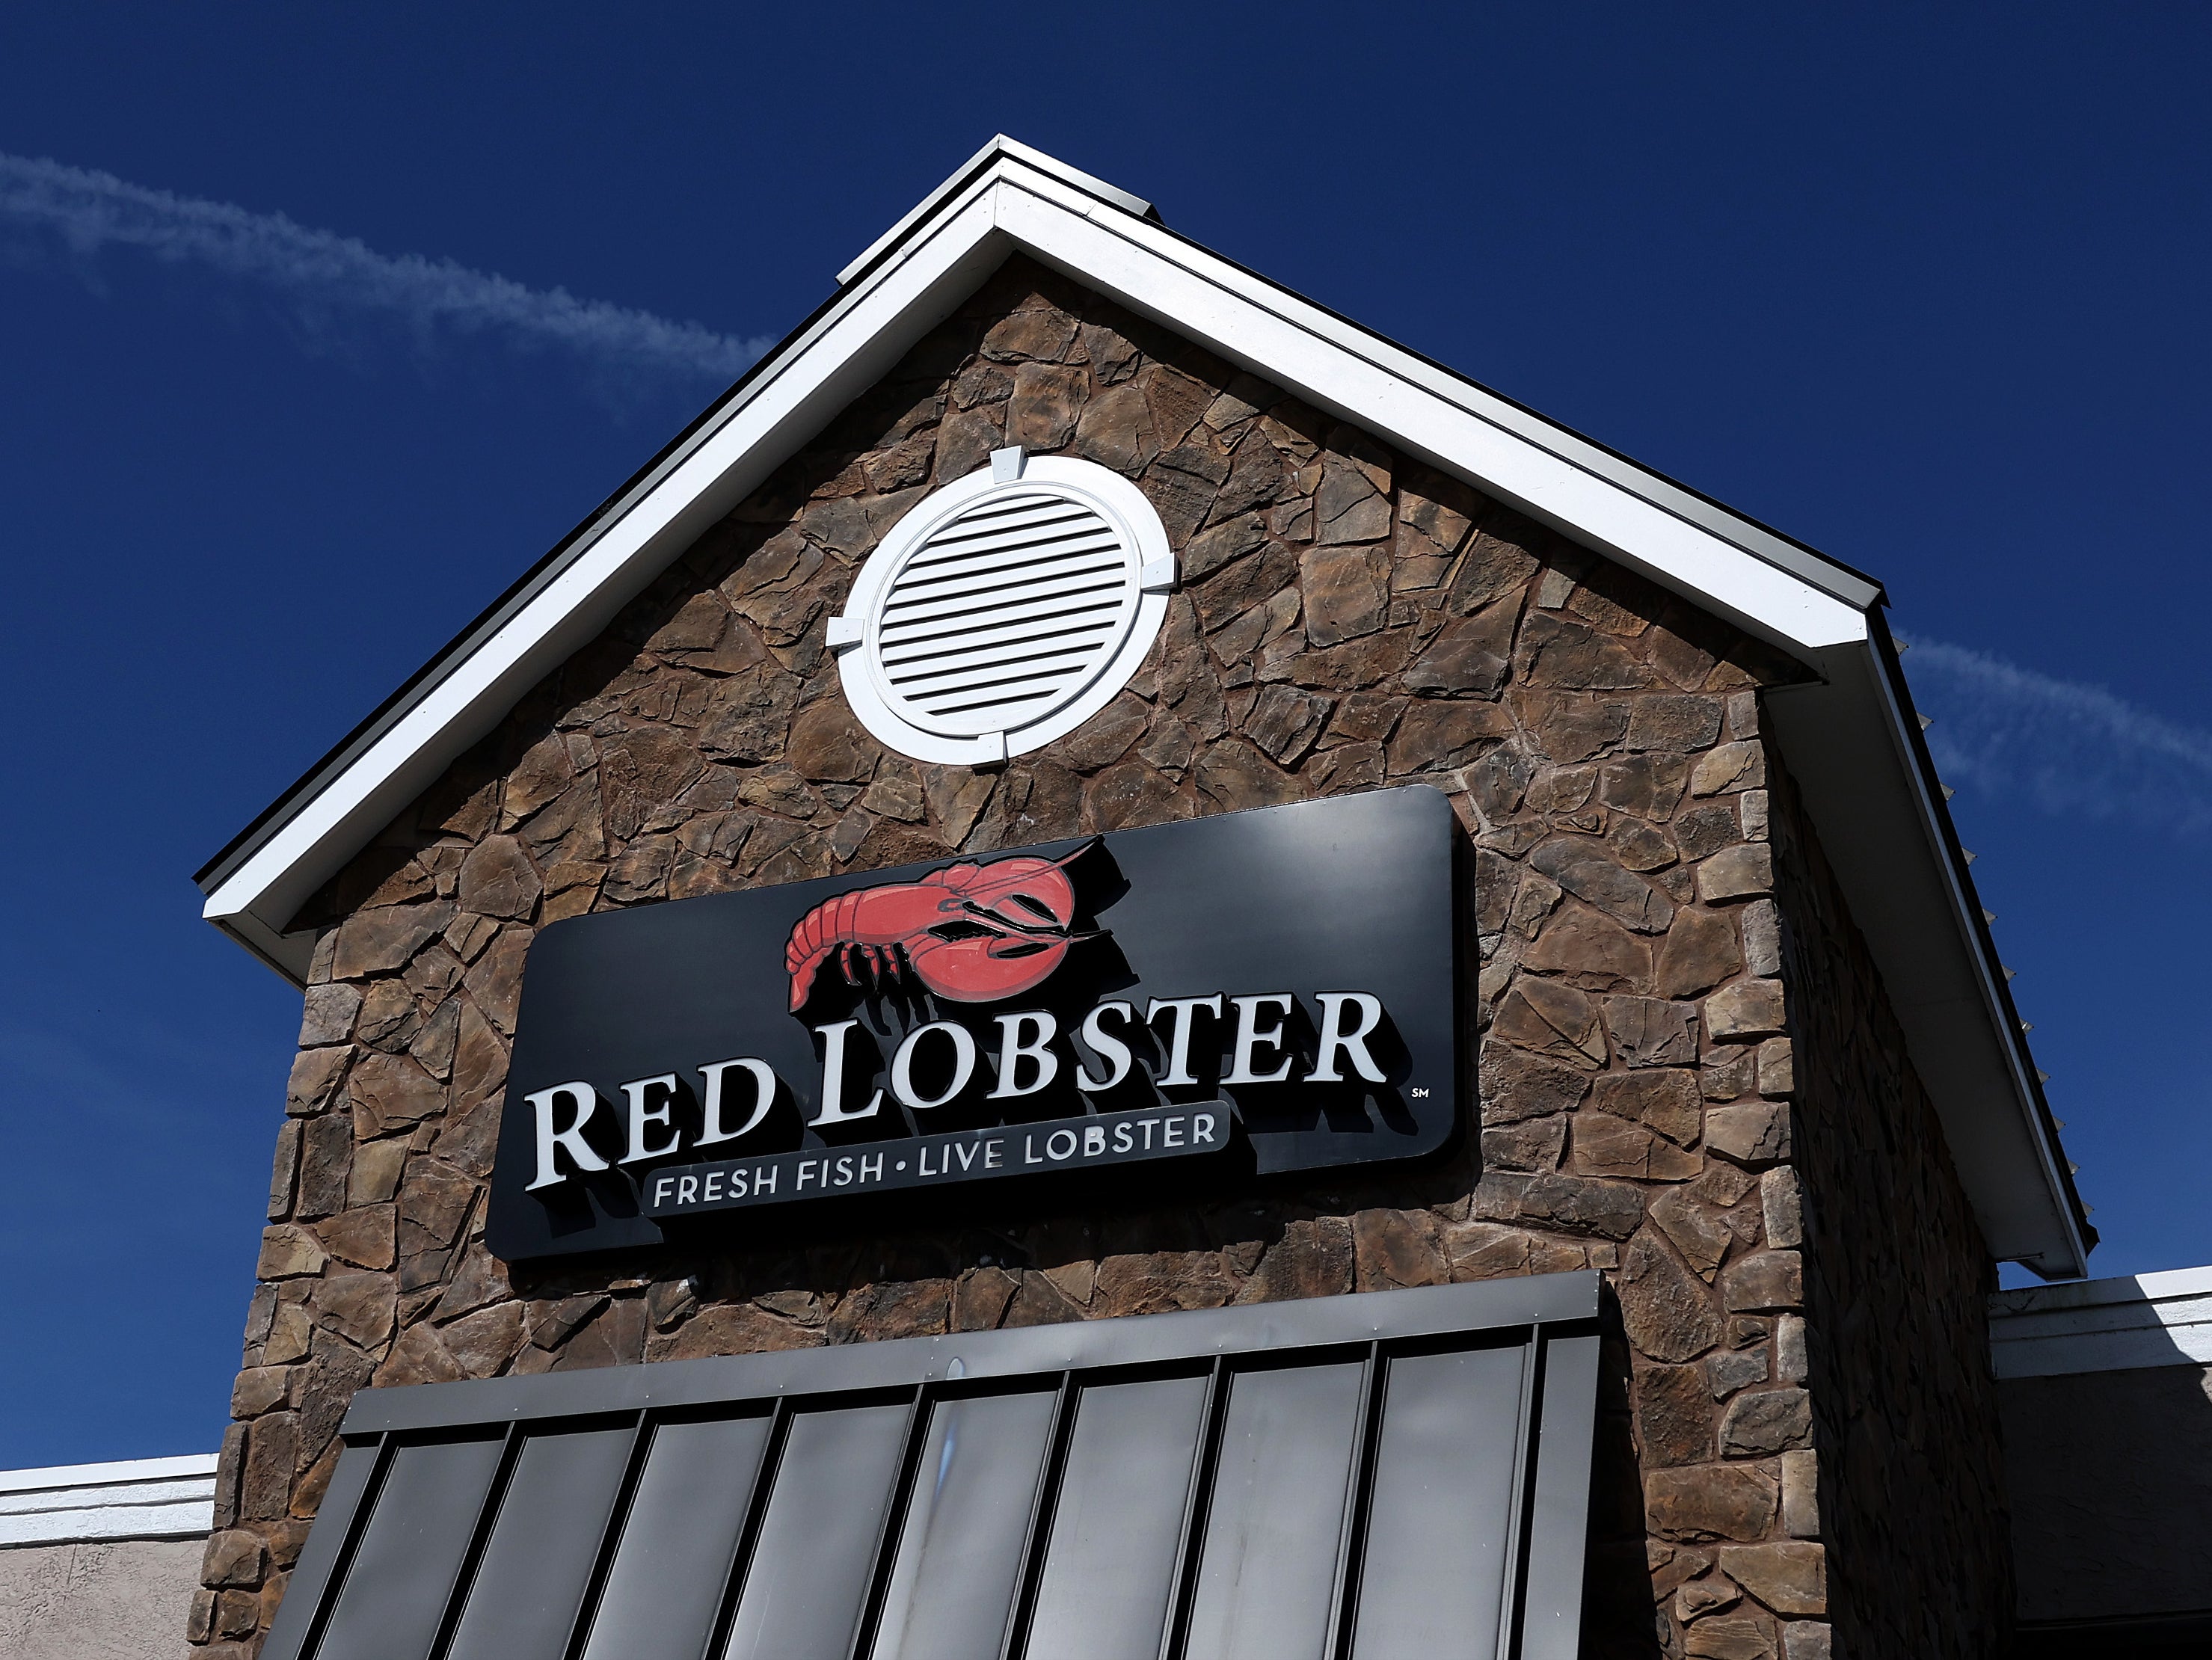 It was recently announced that the troubled seafood restaurant chain Red Lobster will be closing down at least 48 of its roughly 650 branches across the US